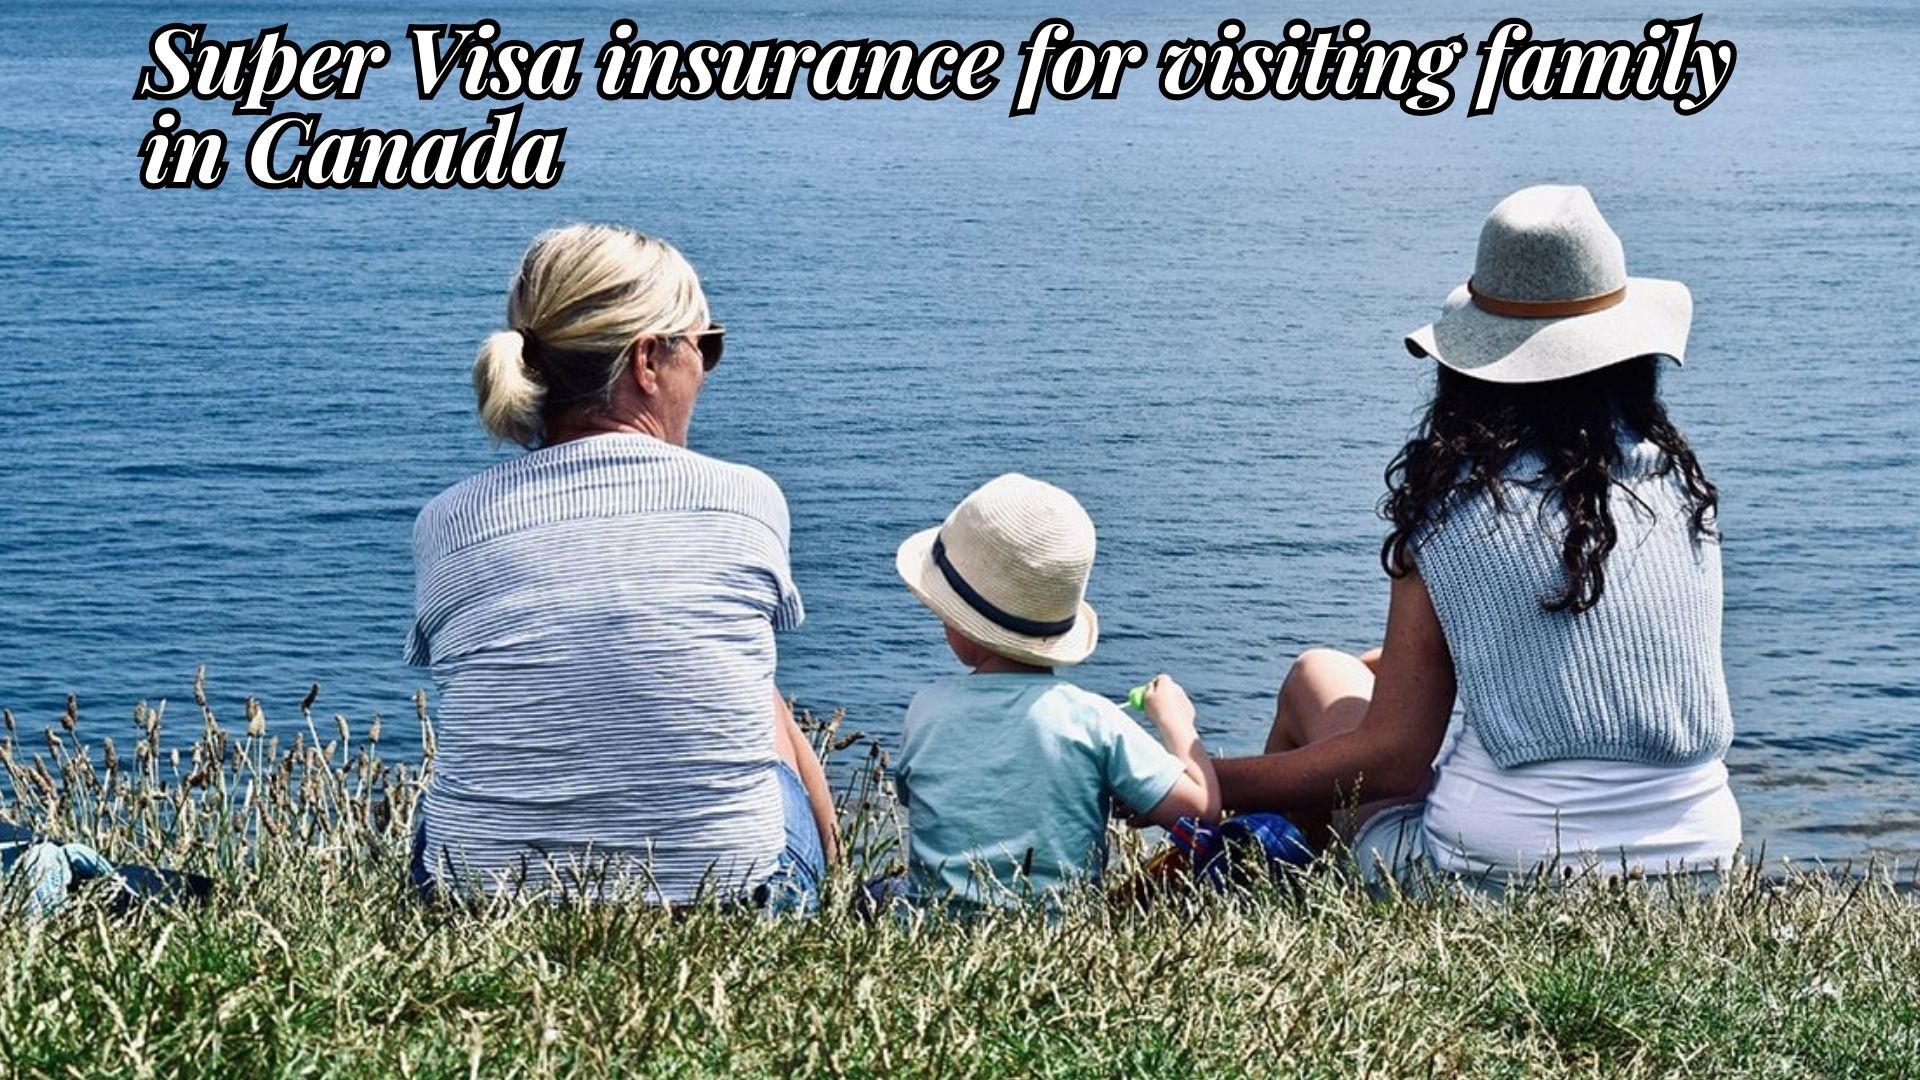 Super Visa insurance for visiting family in Canada